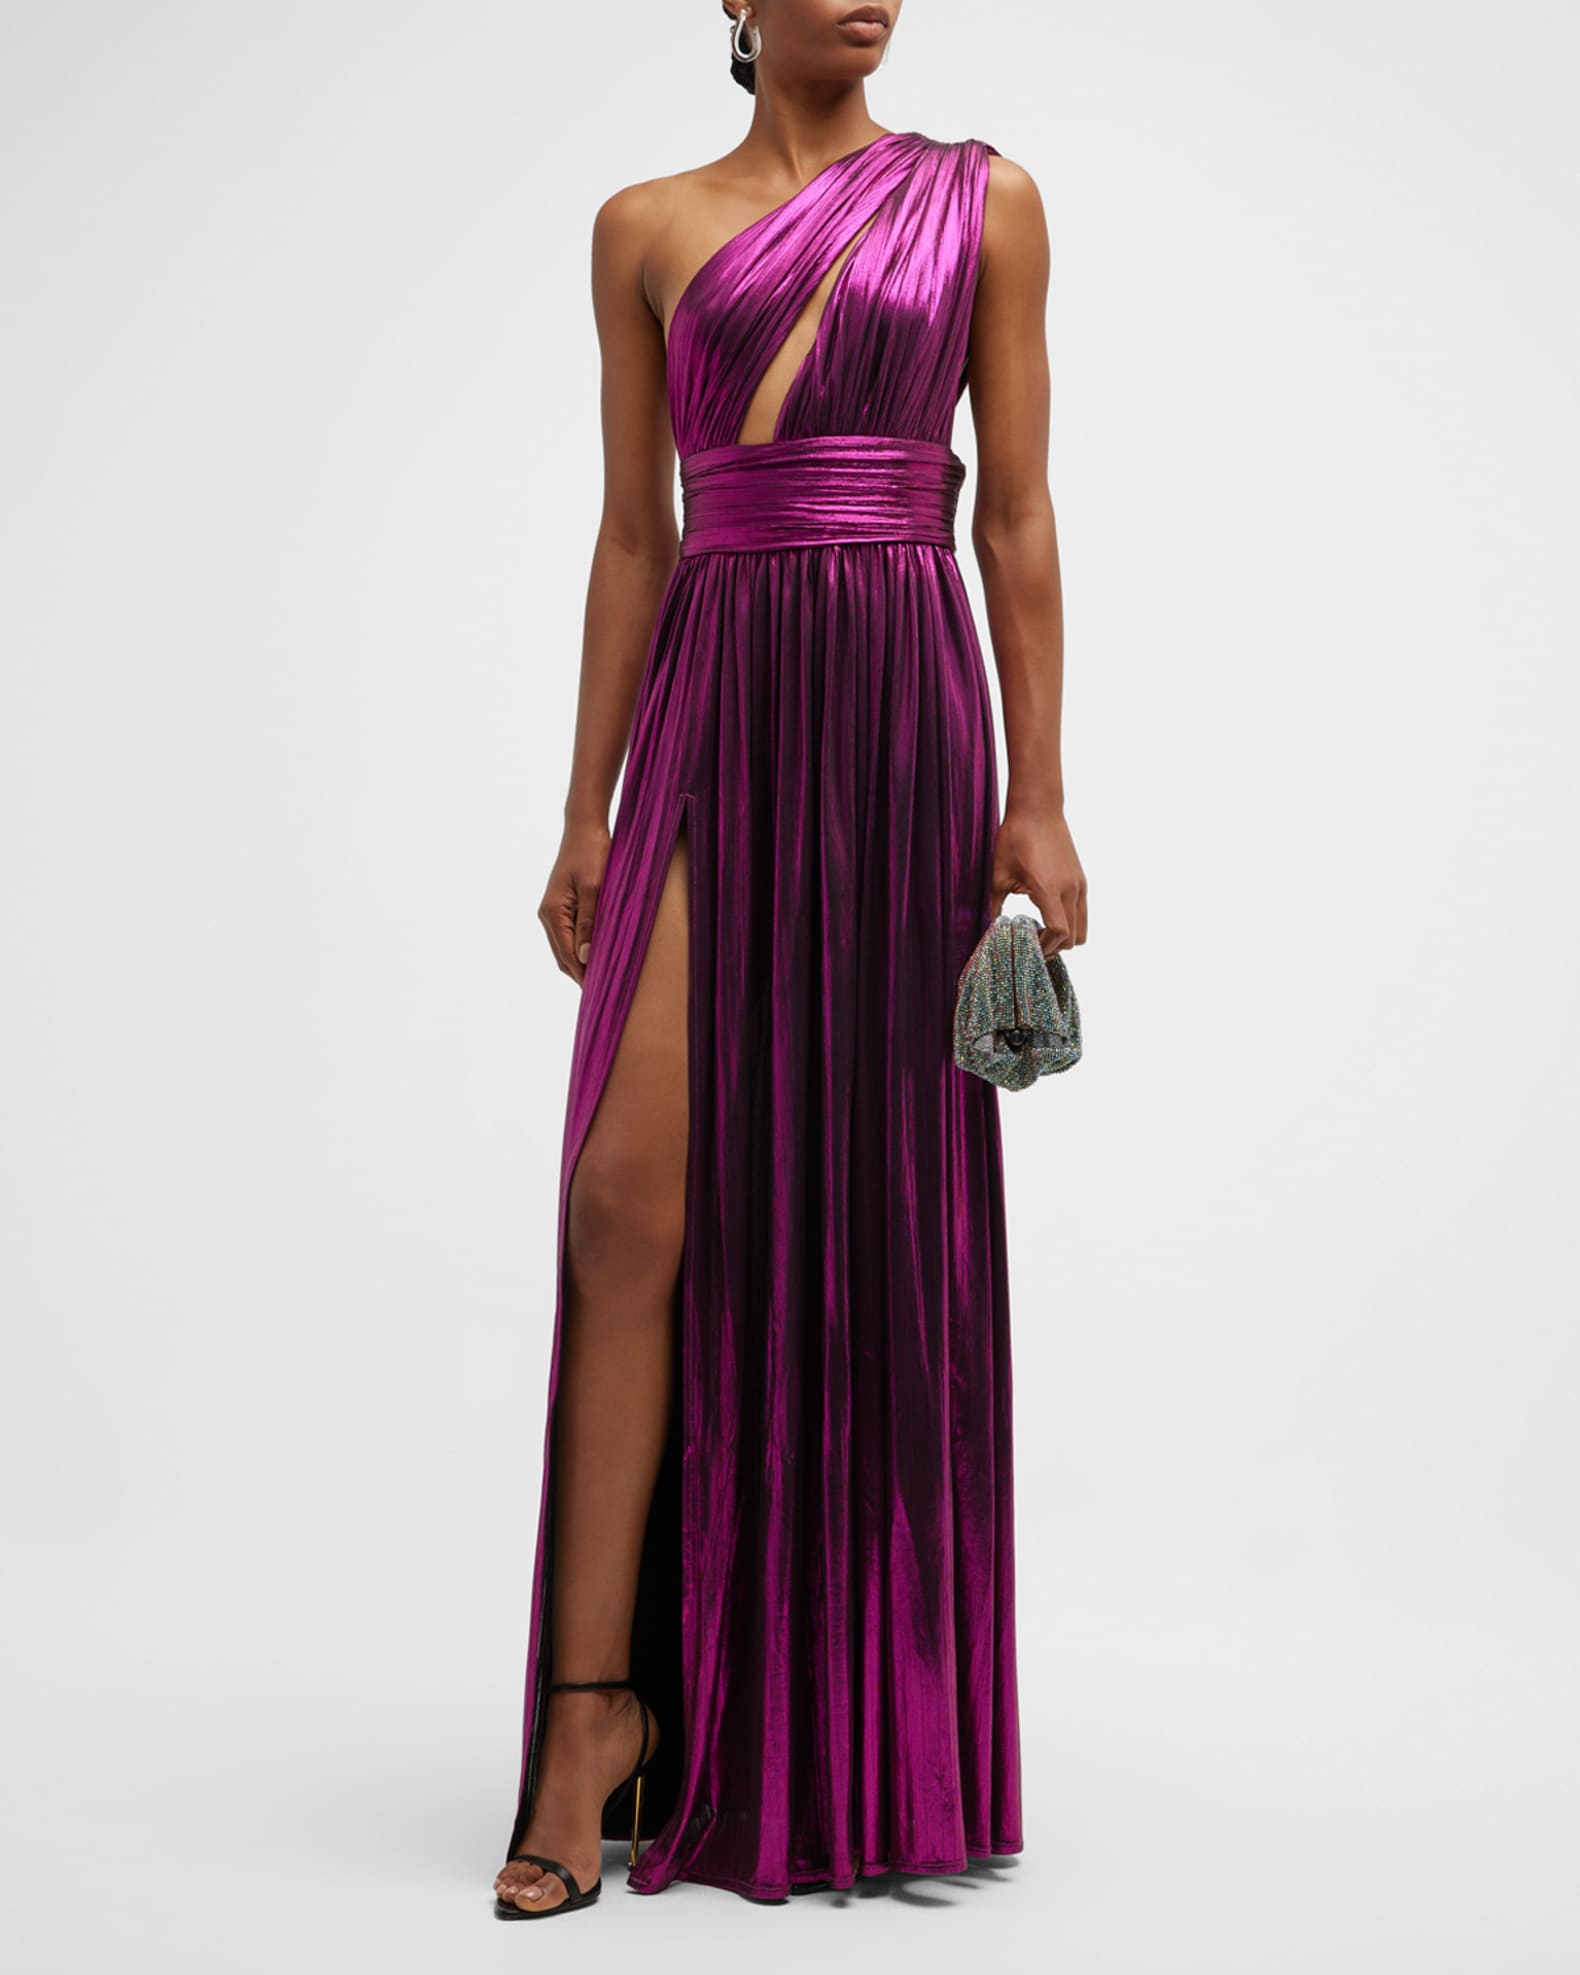 Gorgeous purple gown with thigh slit